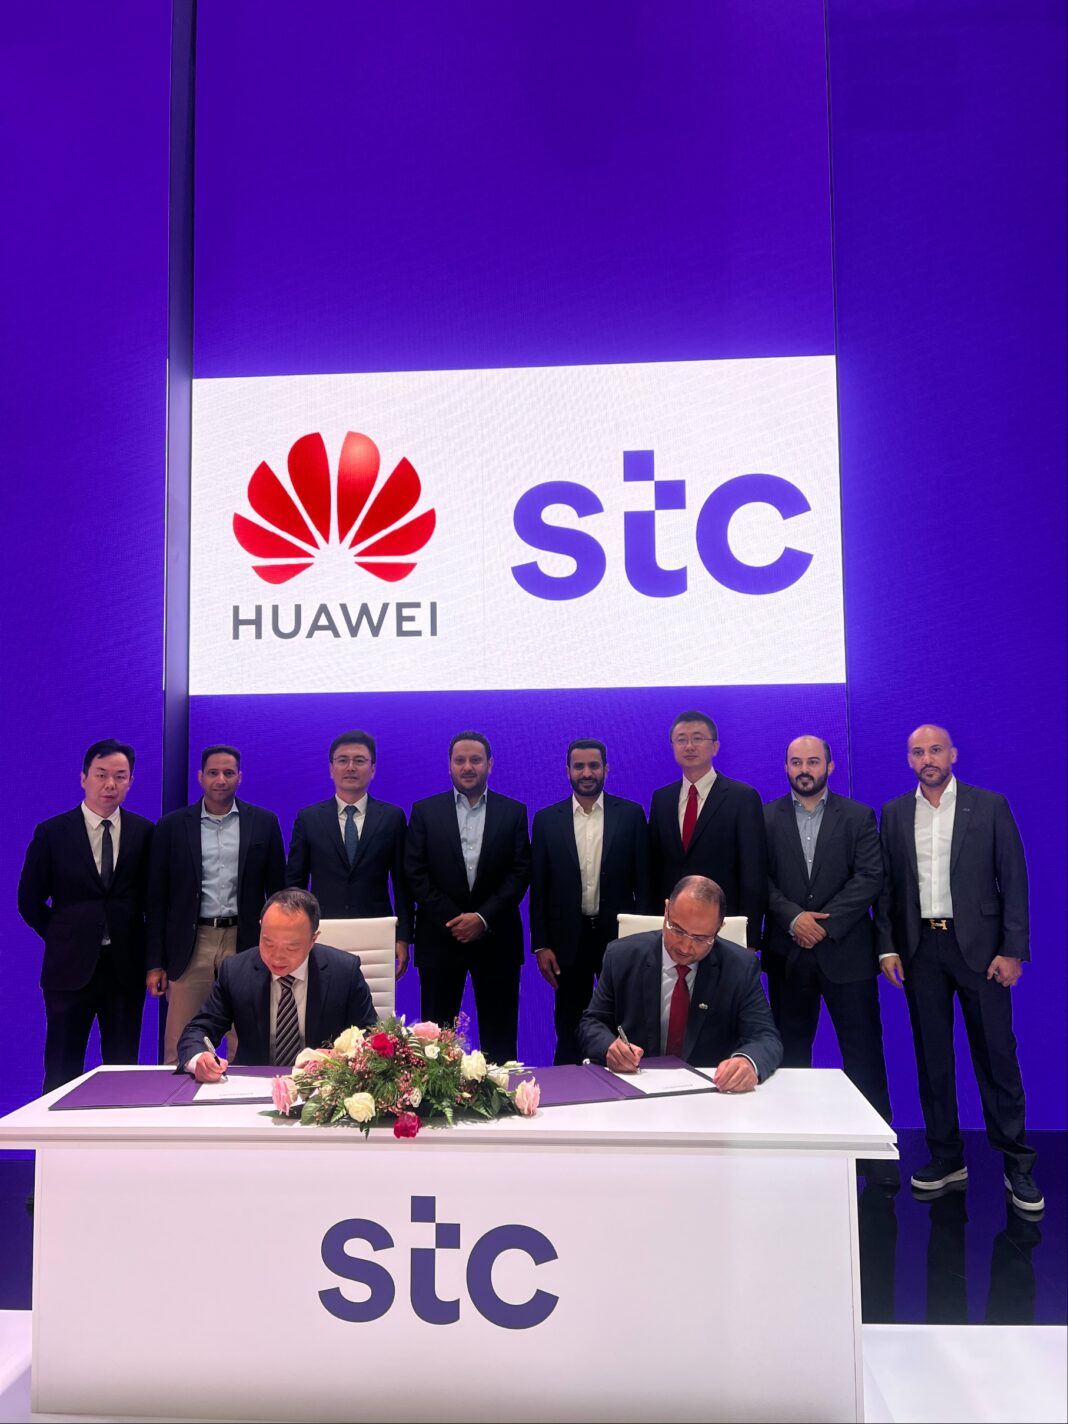 stc-and-Huawei-jointly-announce-to-establish-a-Cloud-Core-Infrastructure-Collaboration-CIC